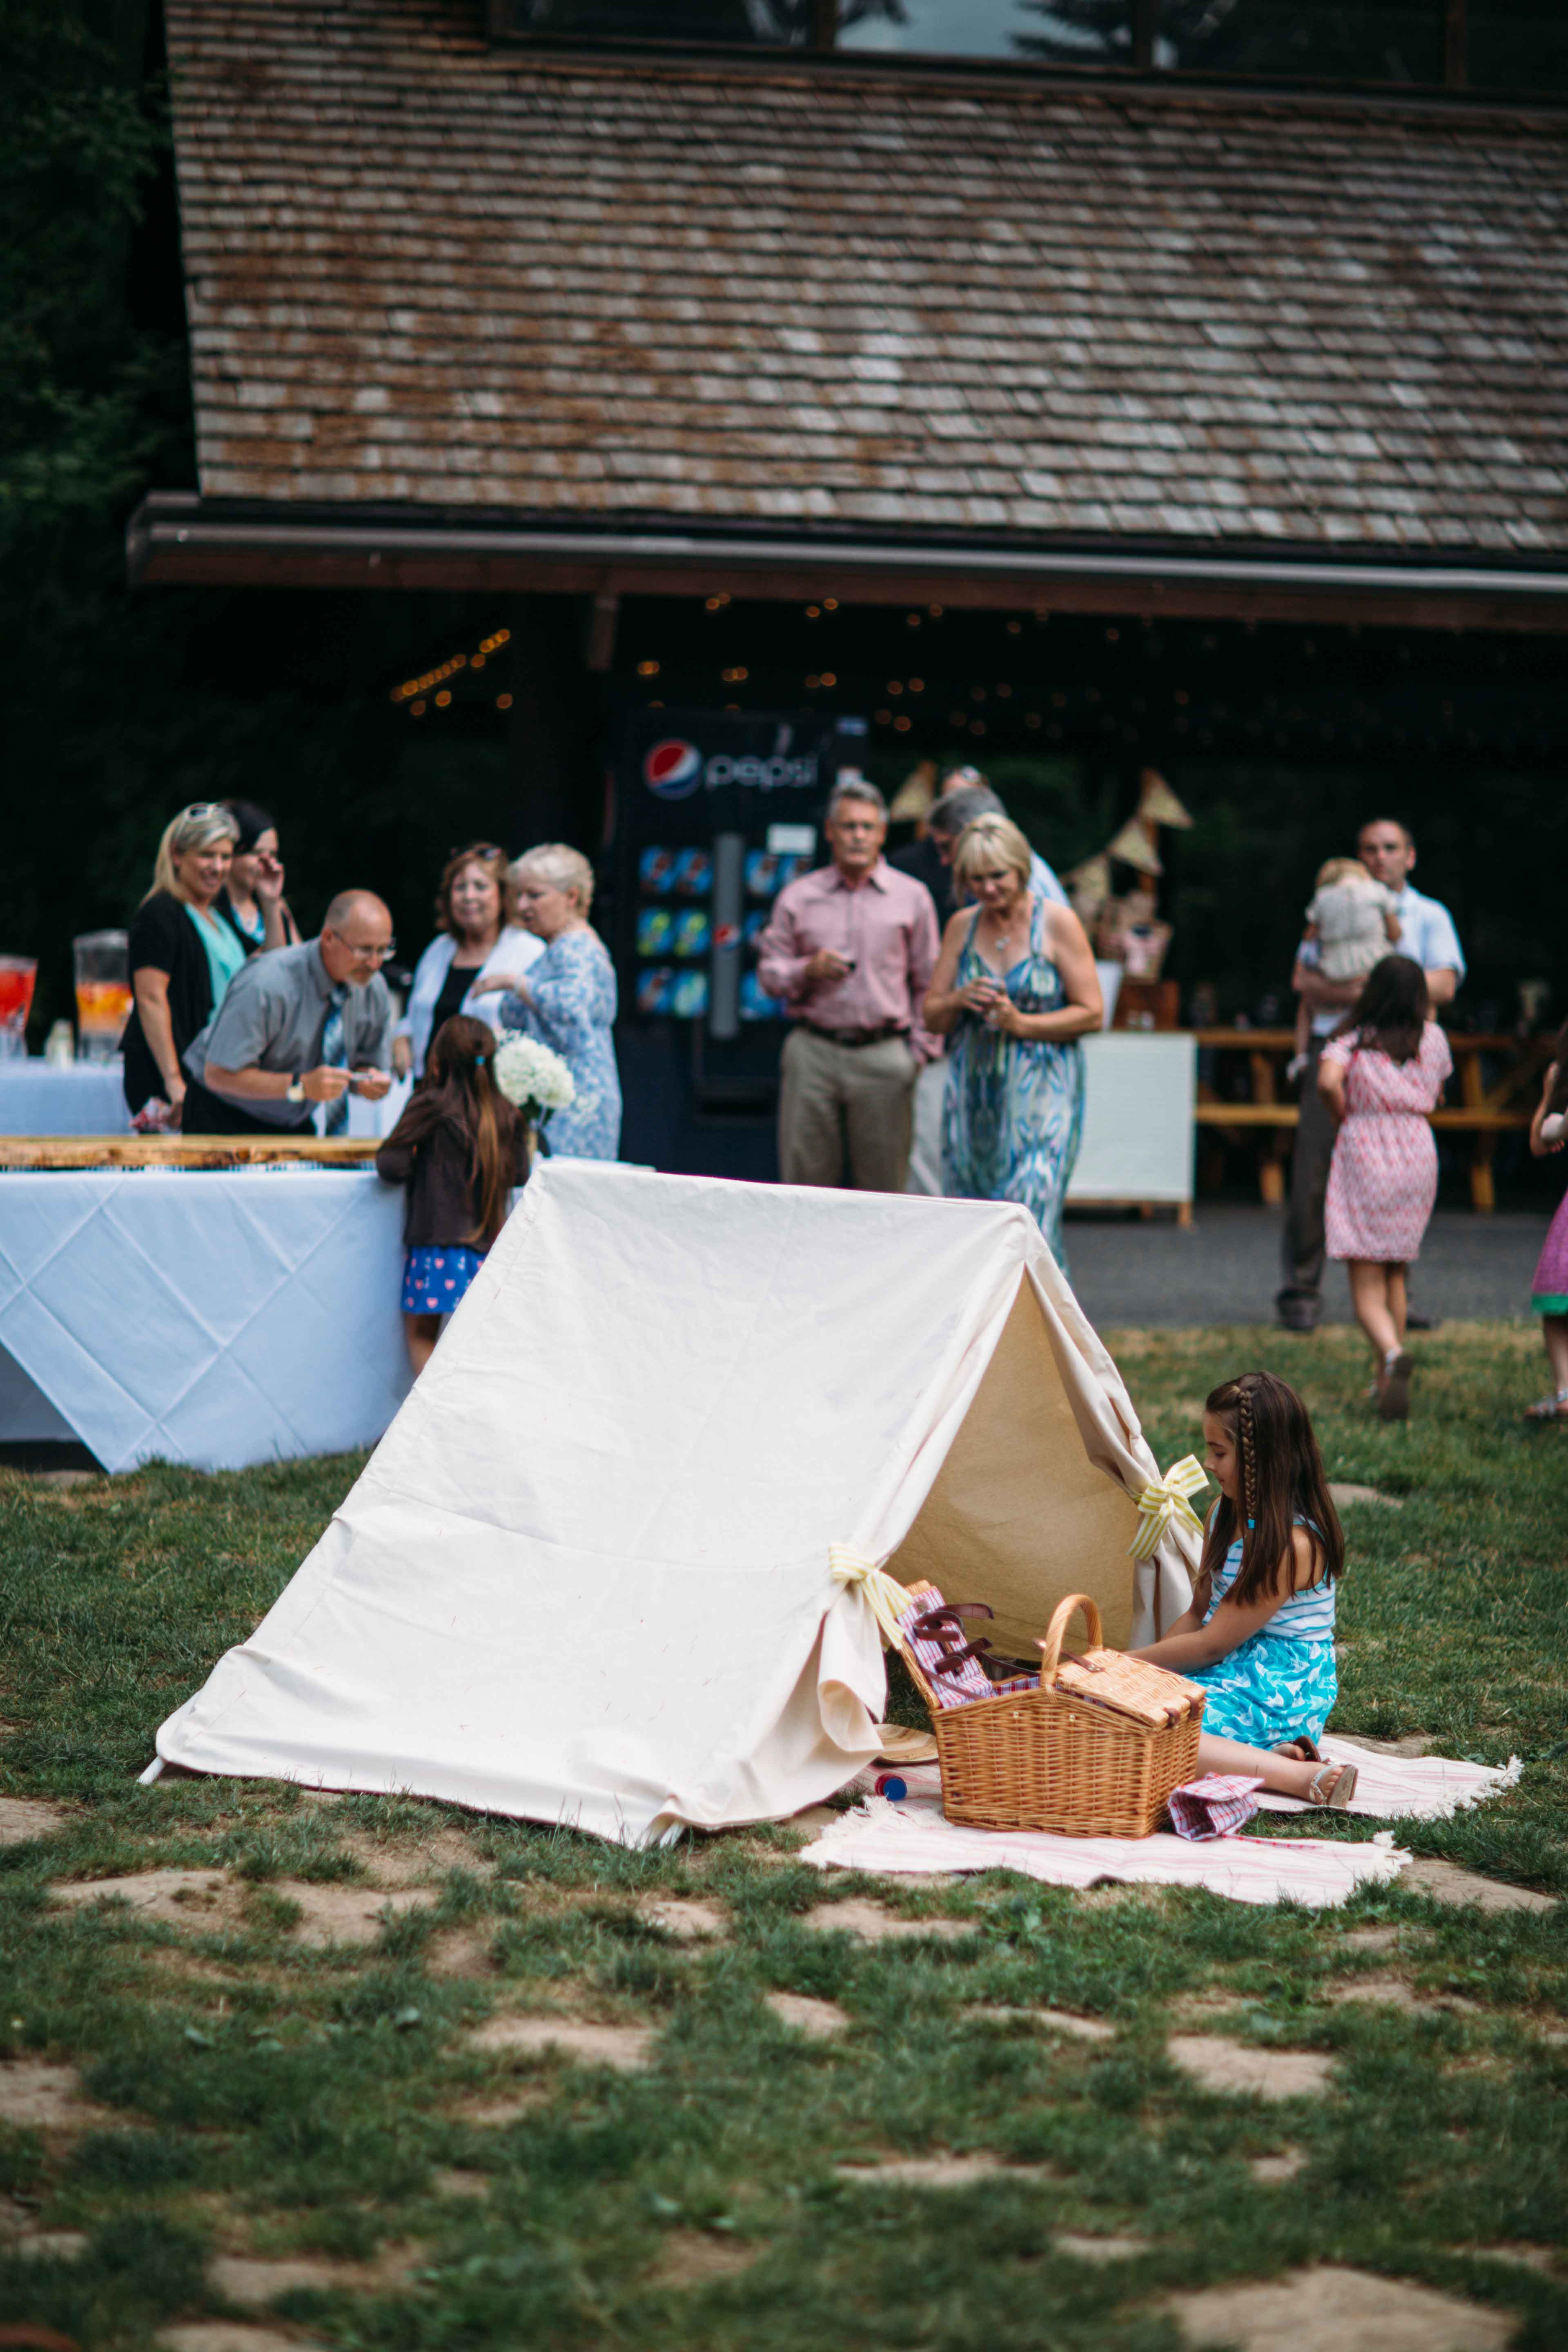 Wedding party with kids' play tent